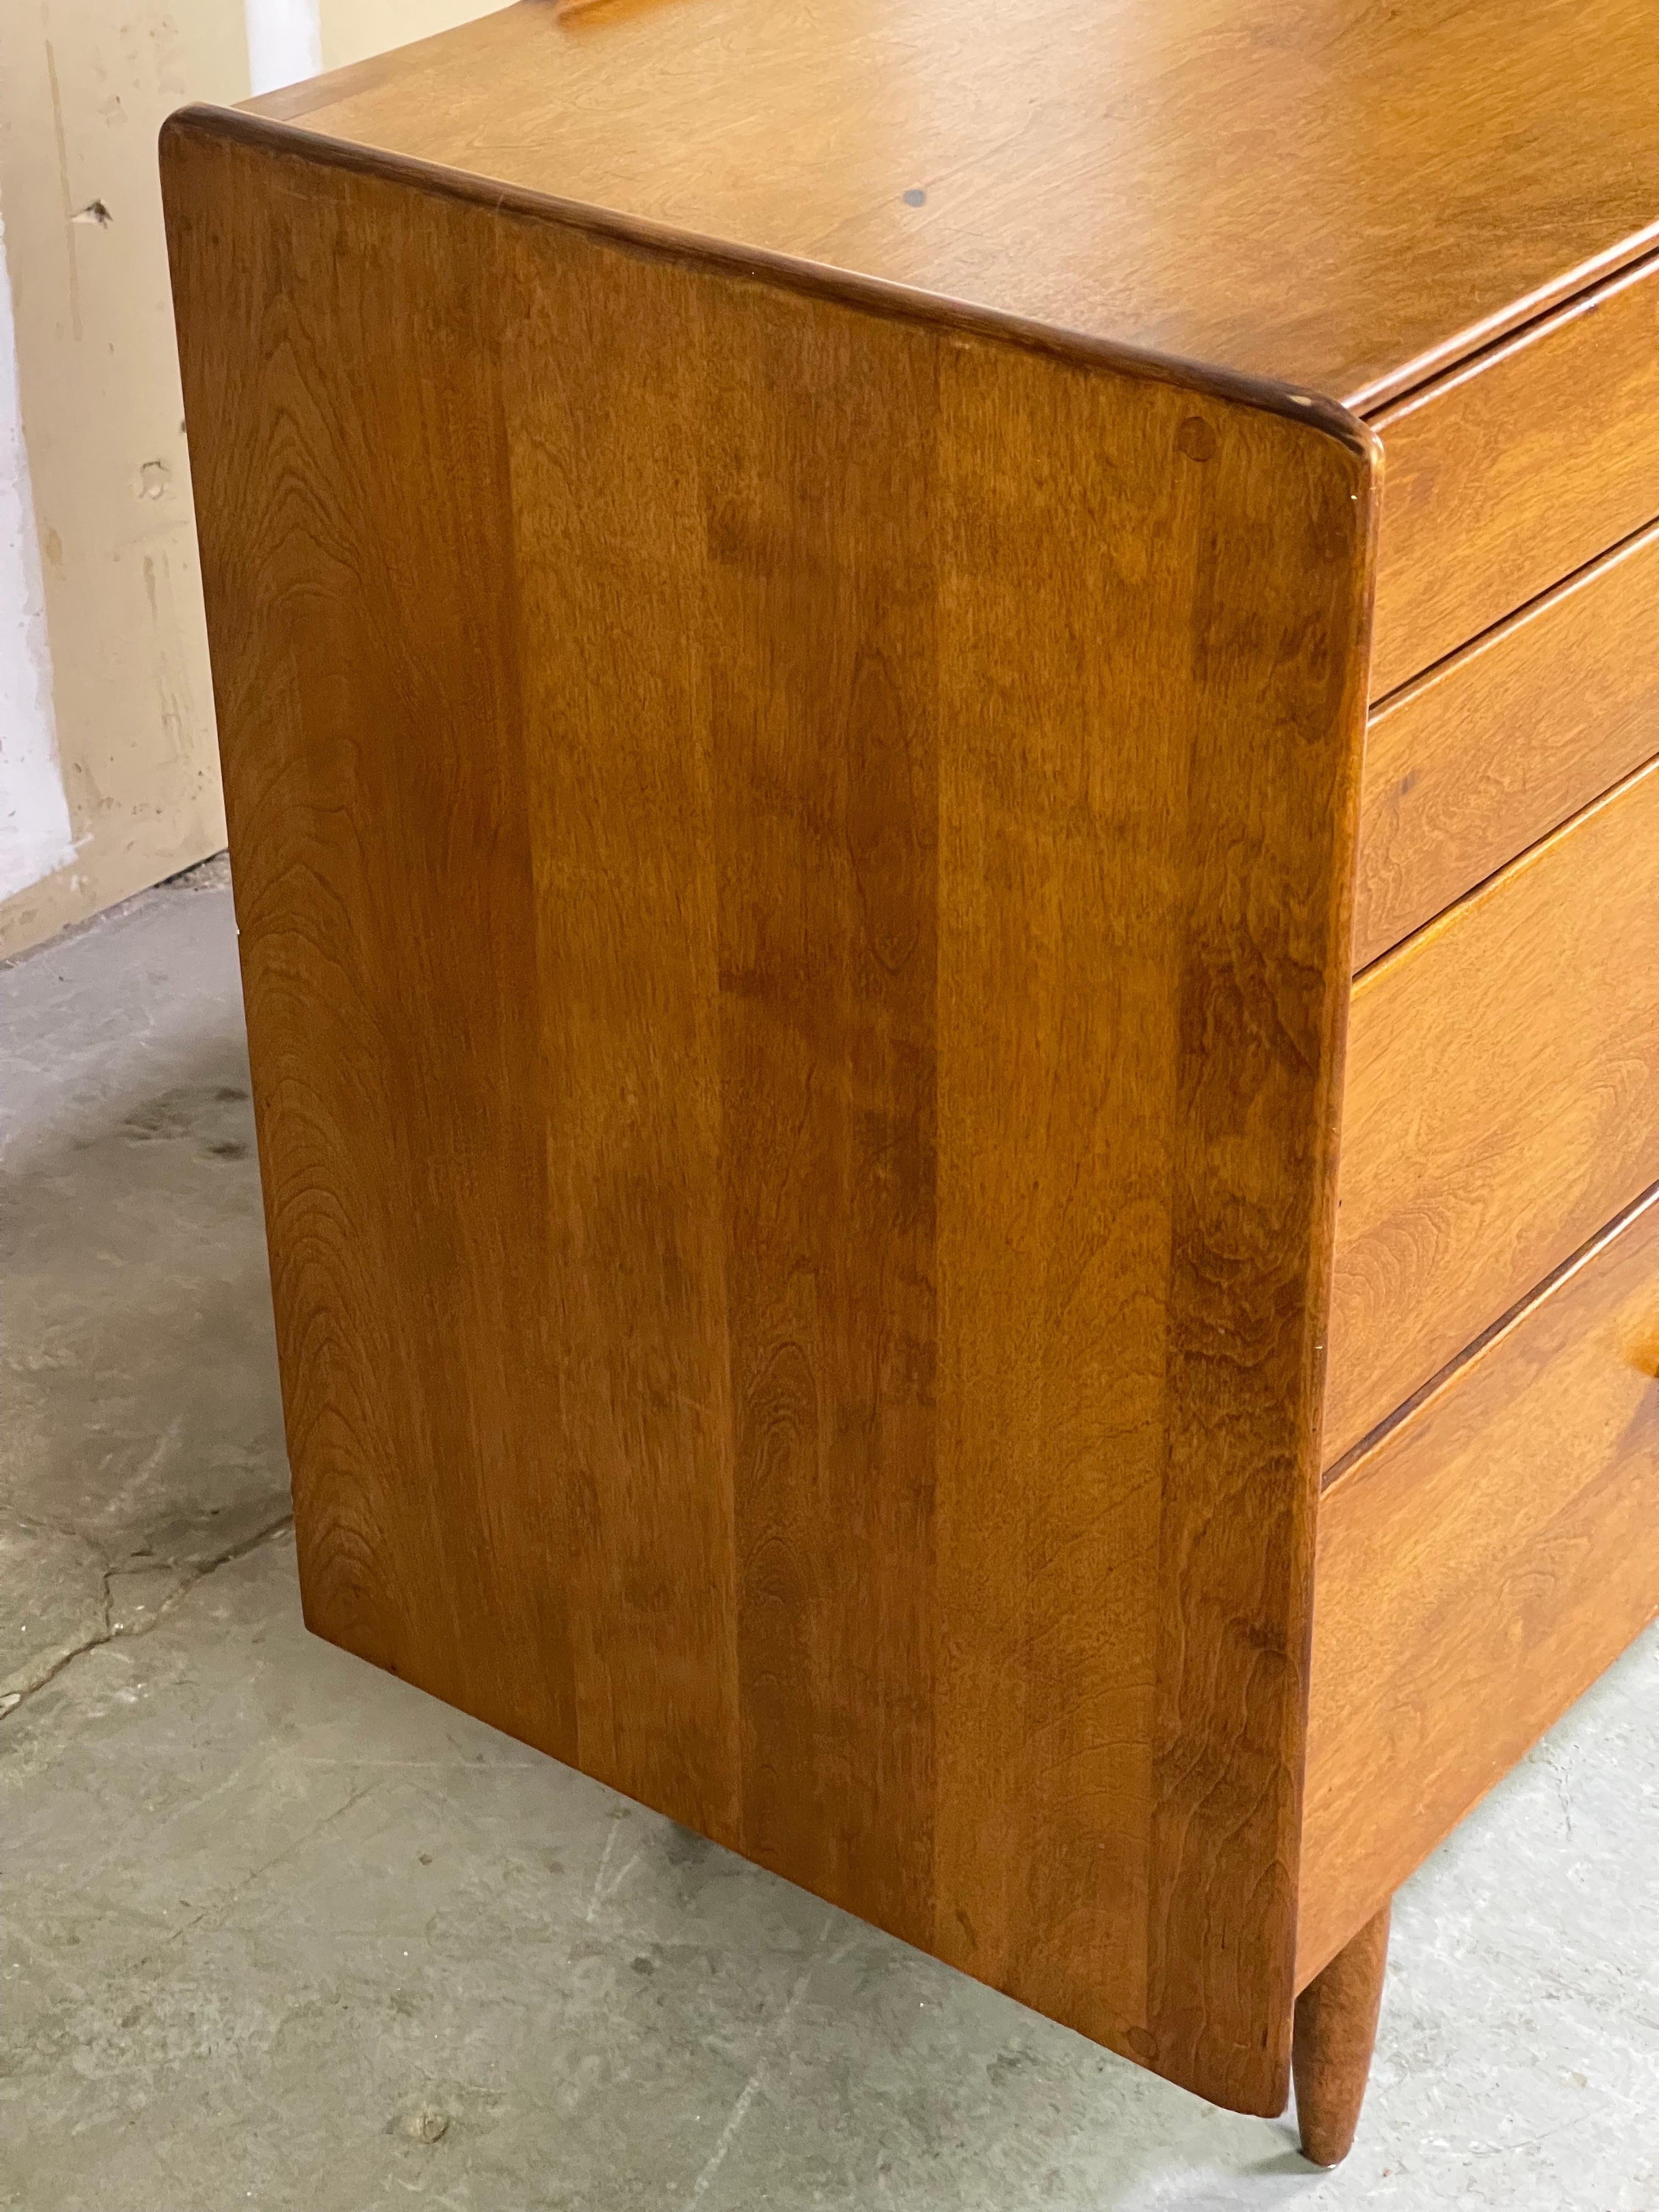 Mid-20th Century Mid-Century Modern Dresser in Solid Maple by Leslie Diamond for Conant Ball